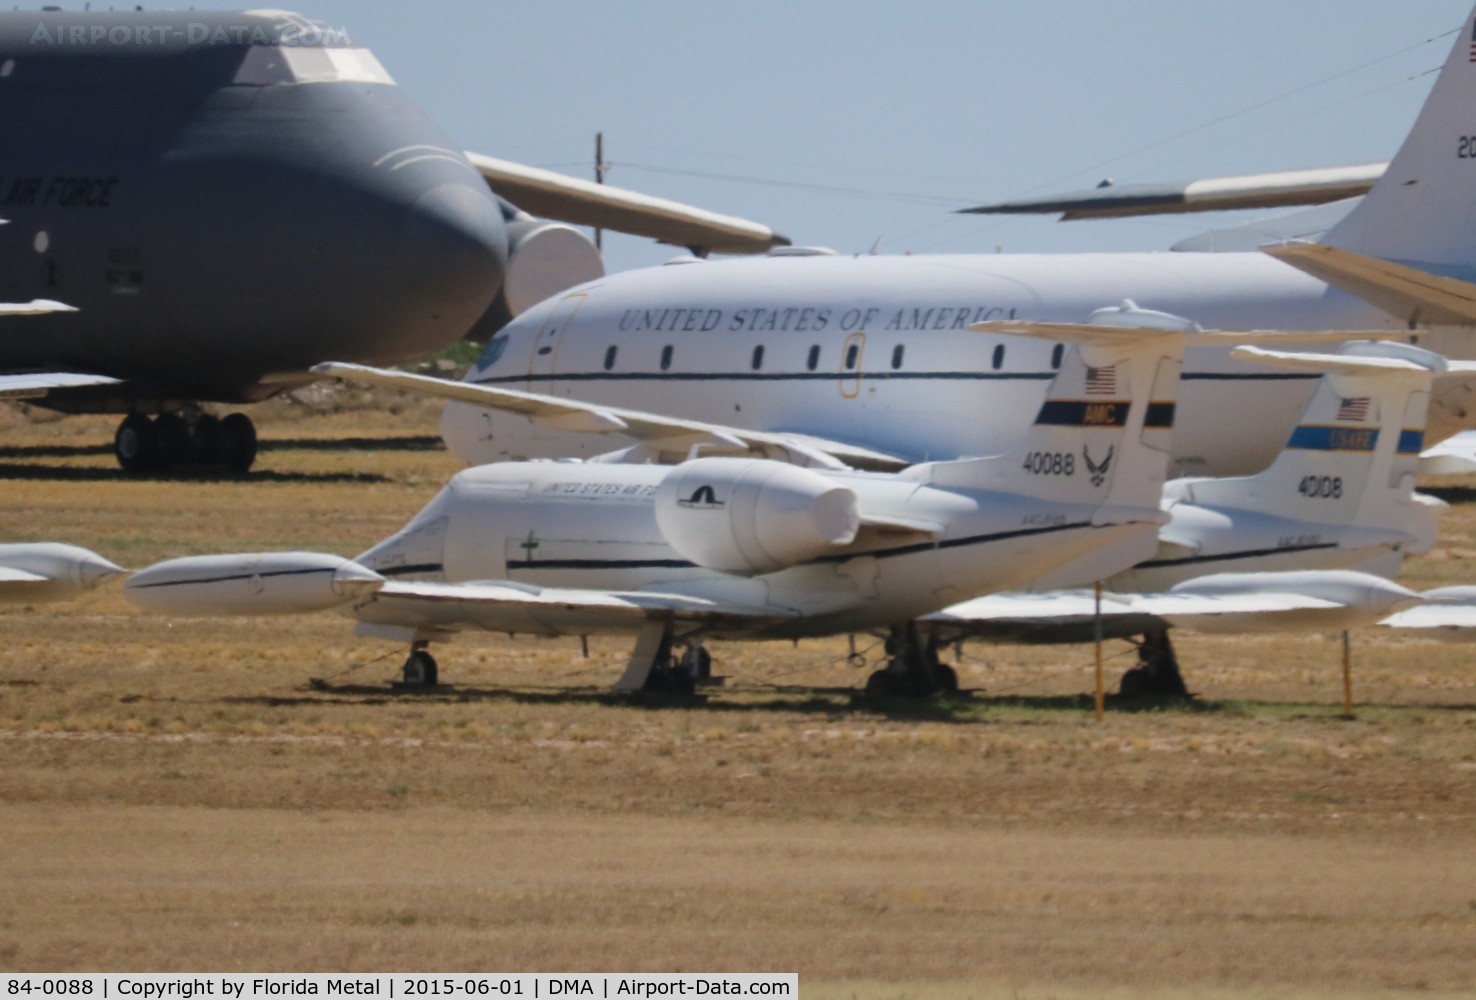 84-0088, 1984 Learjet 35A C-21A C/N 35A-534, C-21A